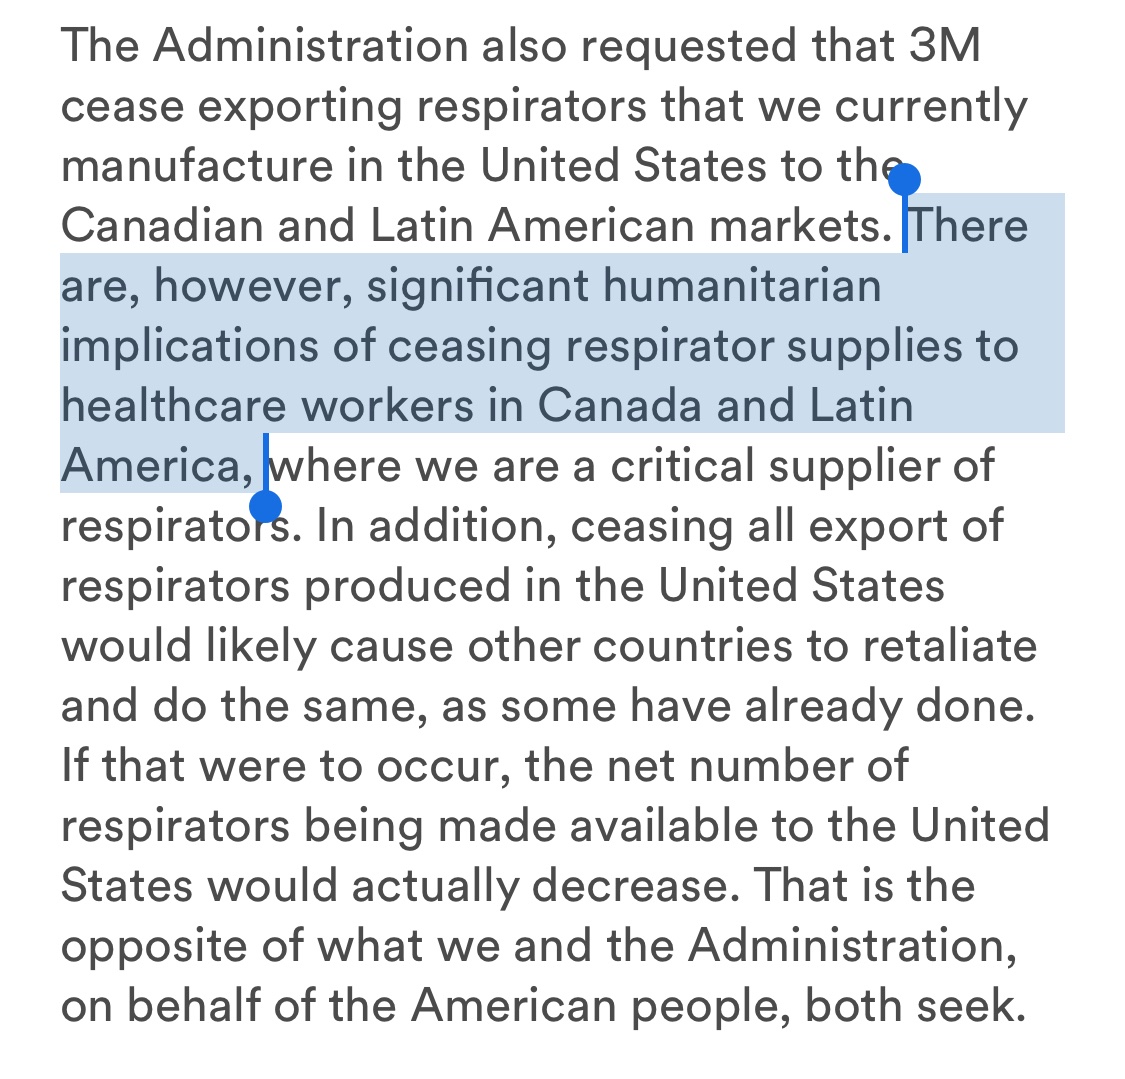 Wow: Trump administration asks 3M to stop exporting its respirators to Canada and Latin America. 3M says no in new press release, citing concerns over the humanitarian impacts of that decision and saying it could backfire for US  https://news.3m.com/press-release/company-english/3m-response-defense-production-act-order